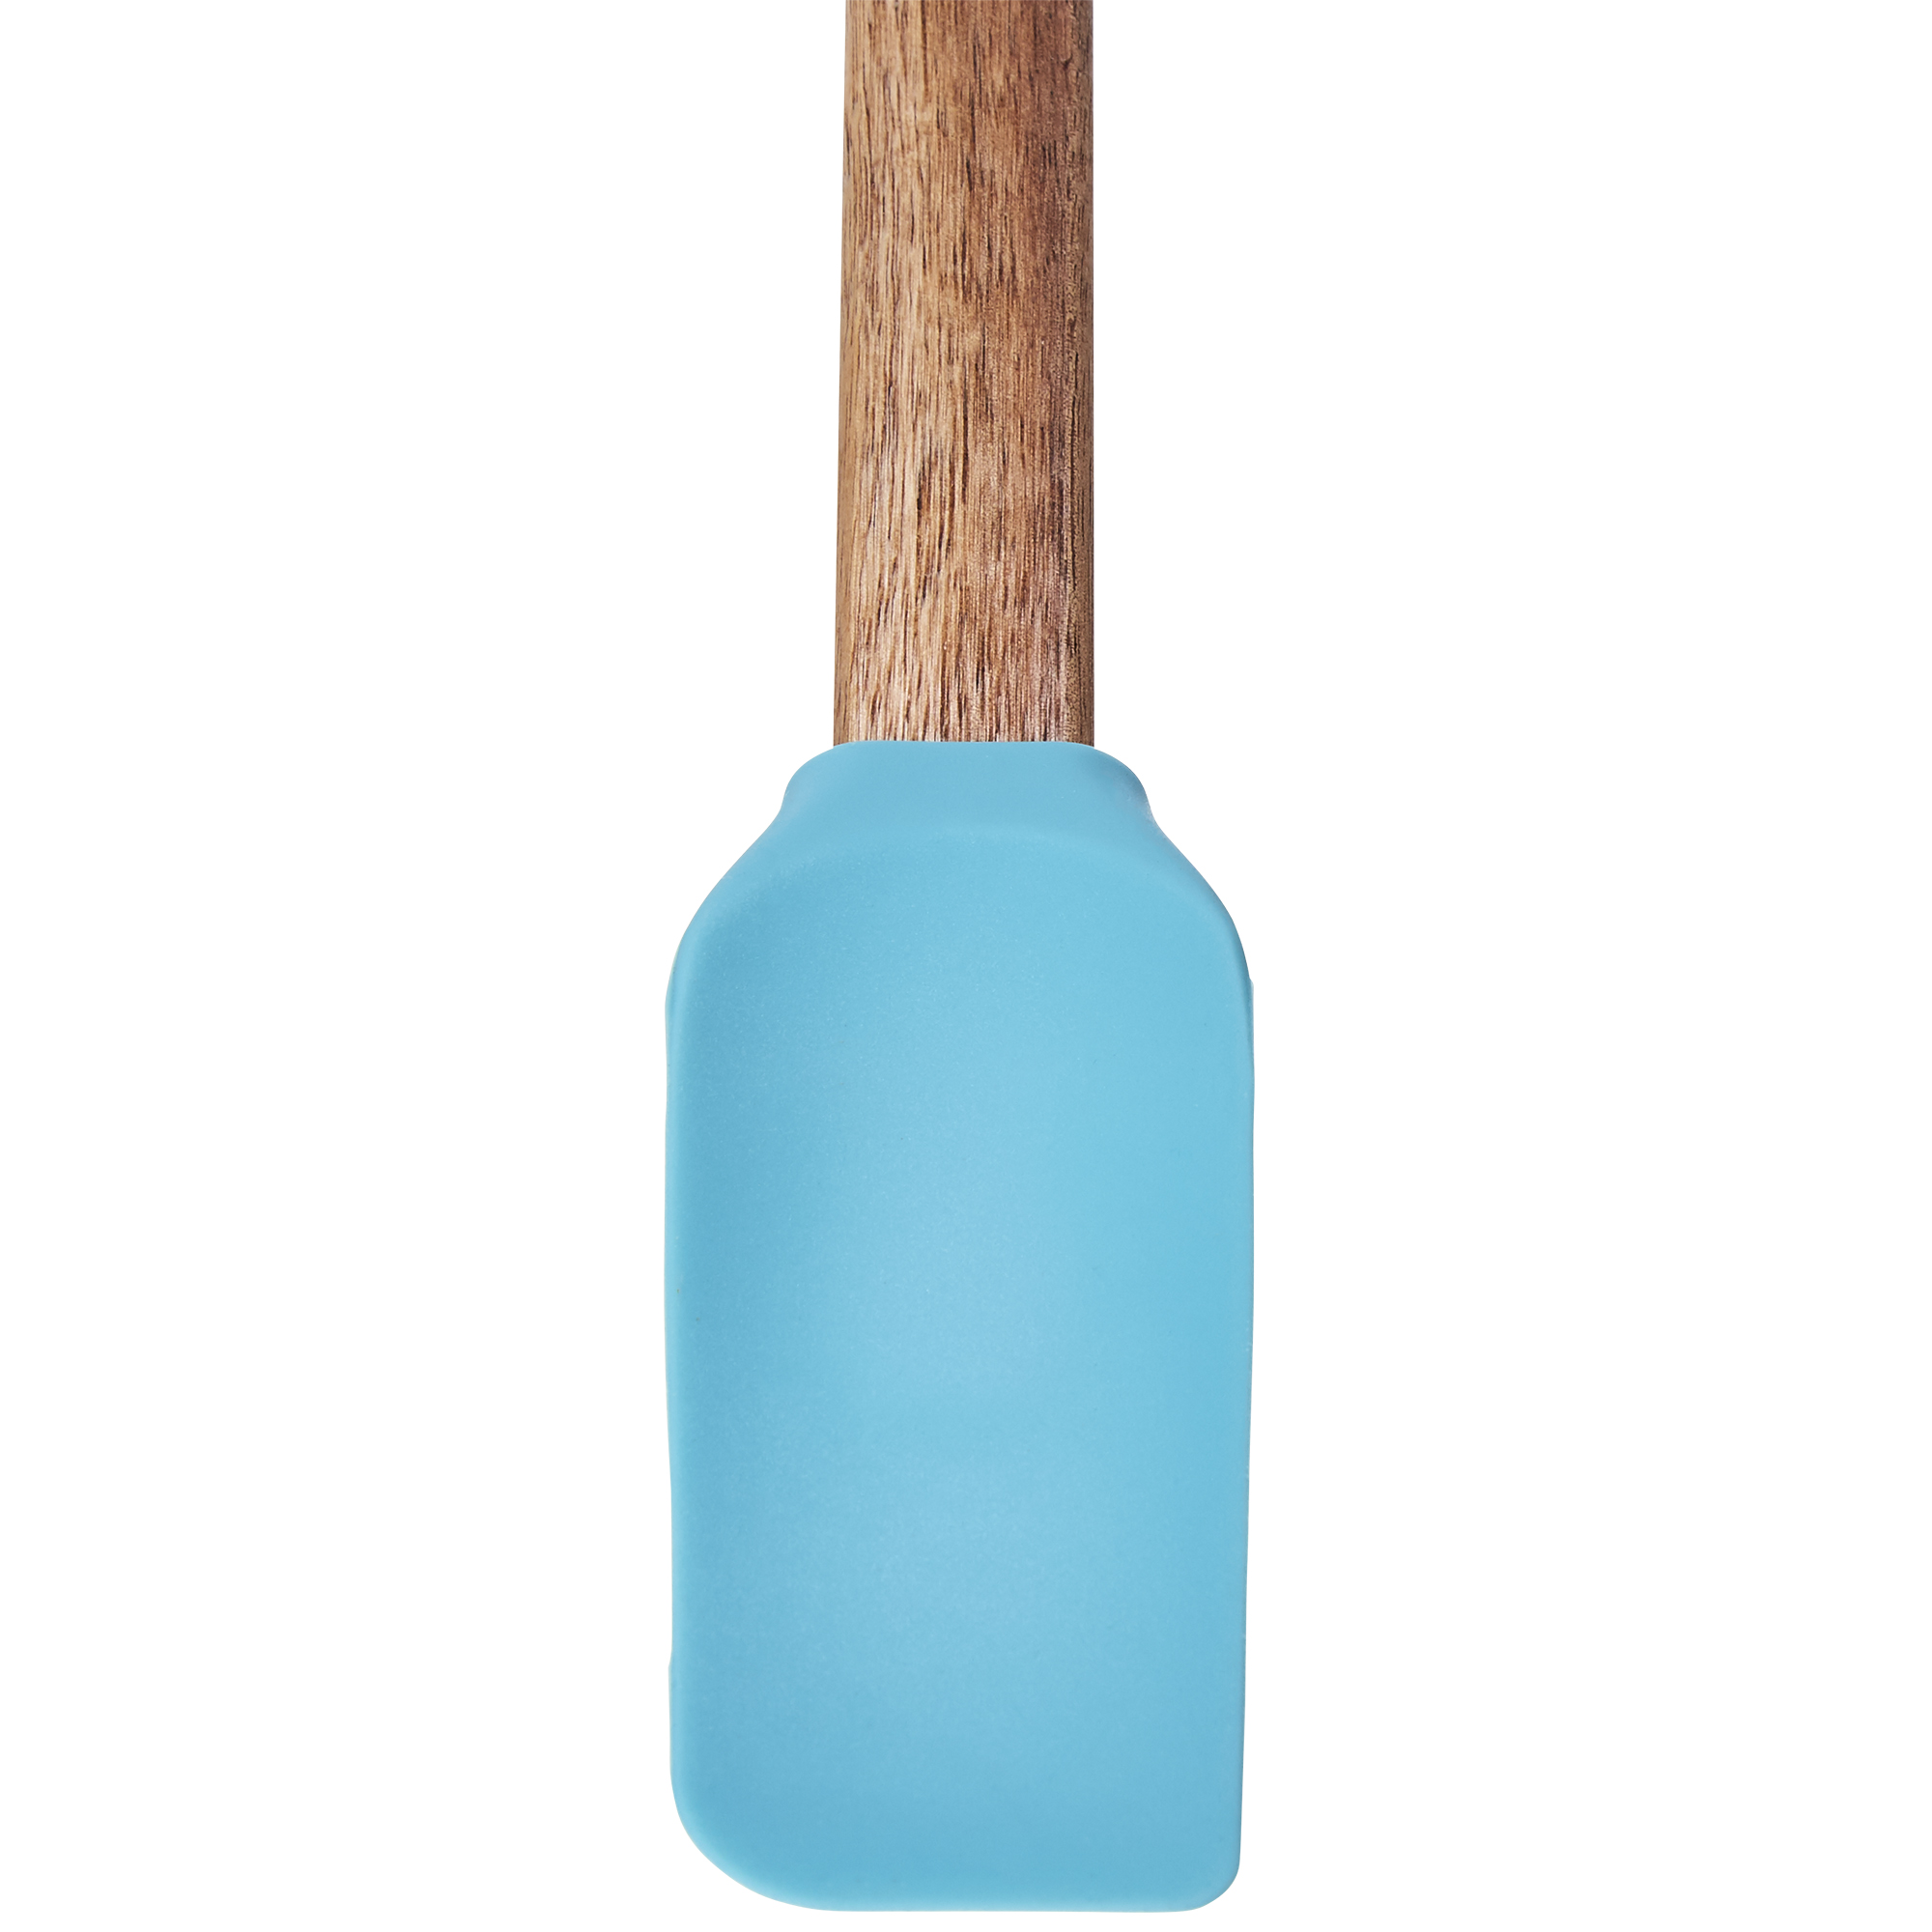 The Pioneer Woman 4-Piece Silicone Spatula Set with Acacia Wood Handles, Assorted Colors - image 4 of 12